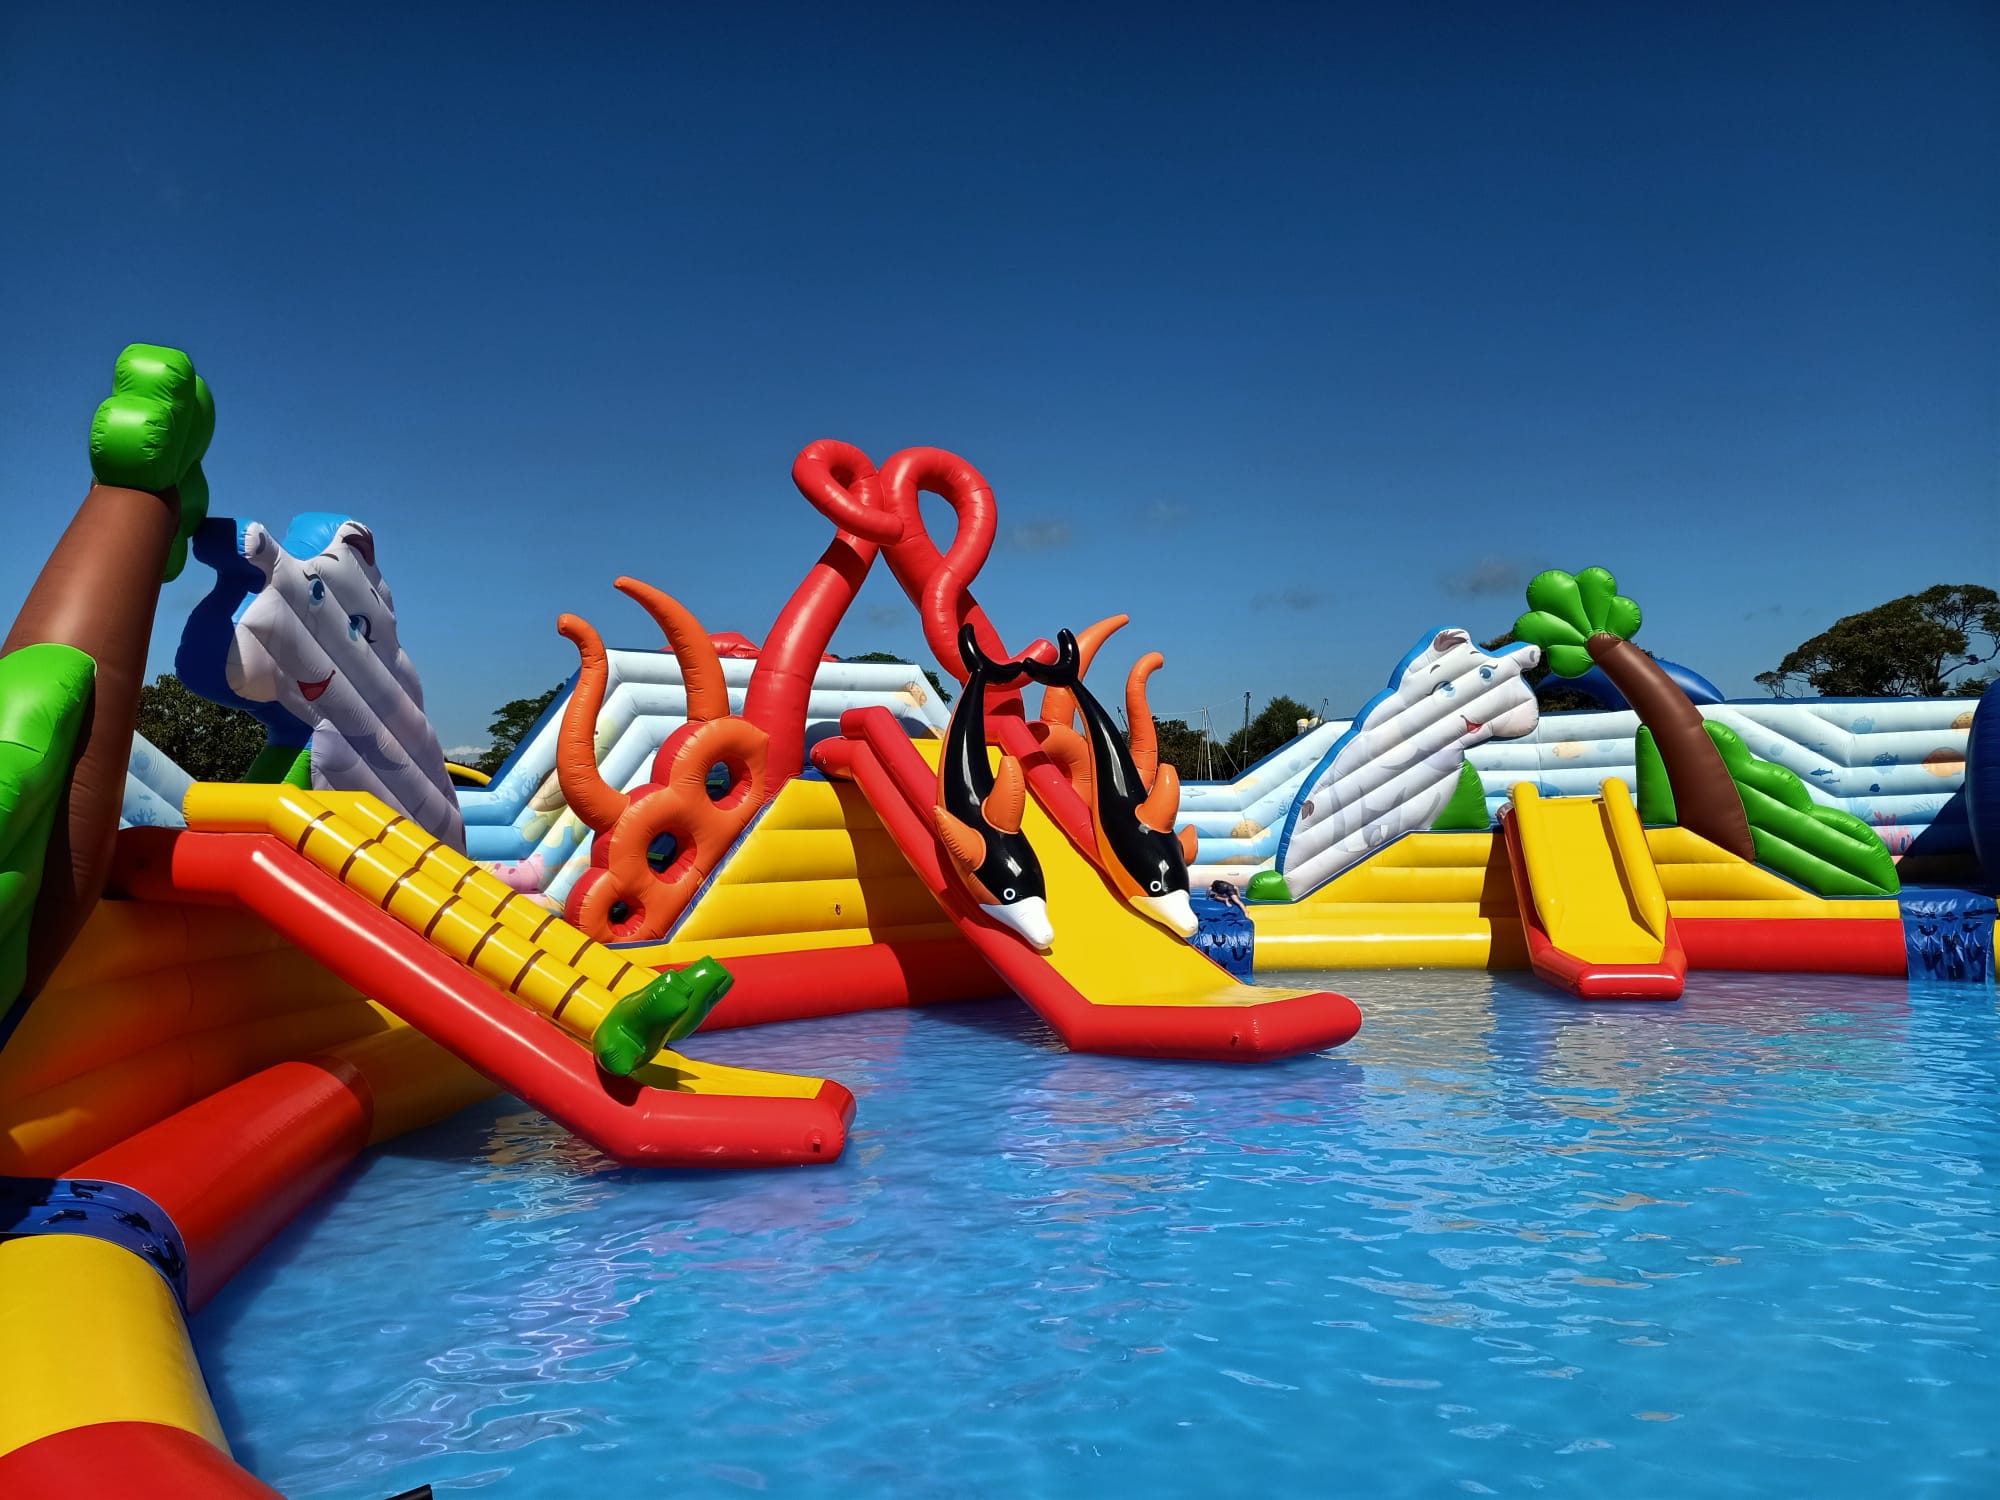 Let the kids go wild on the exciting inflatable Splash Park complete with slides and a shallow splash pool for water play fun!